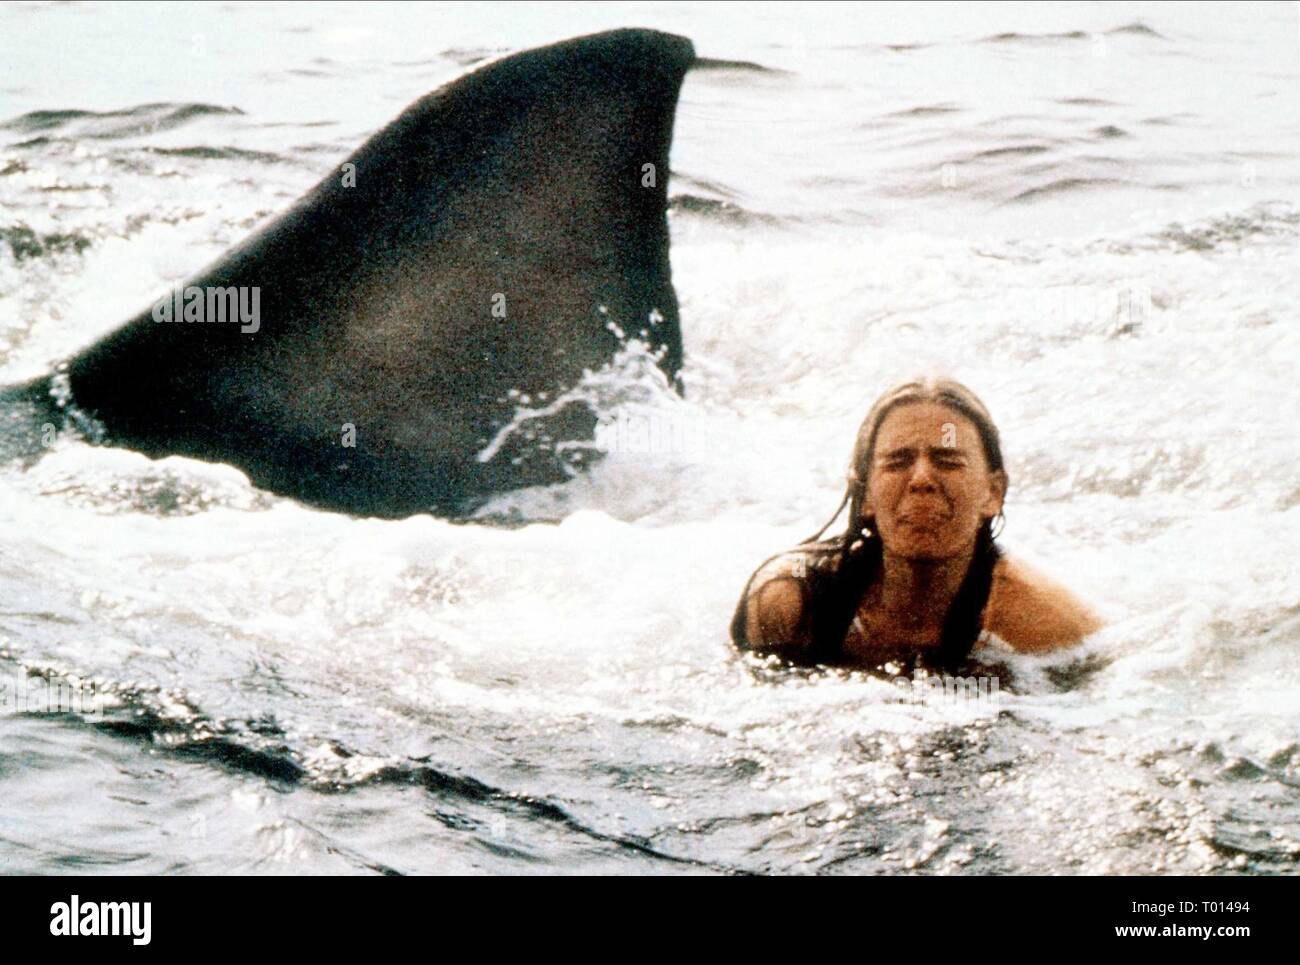 CINDY GROVER, JAWS 2, 1978 Stock Photo